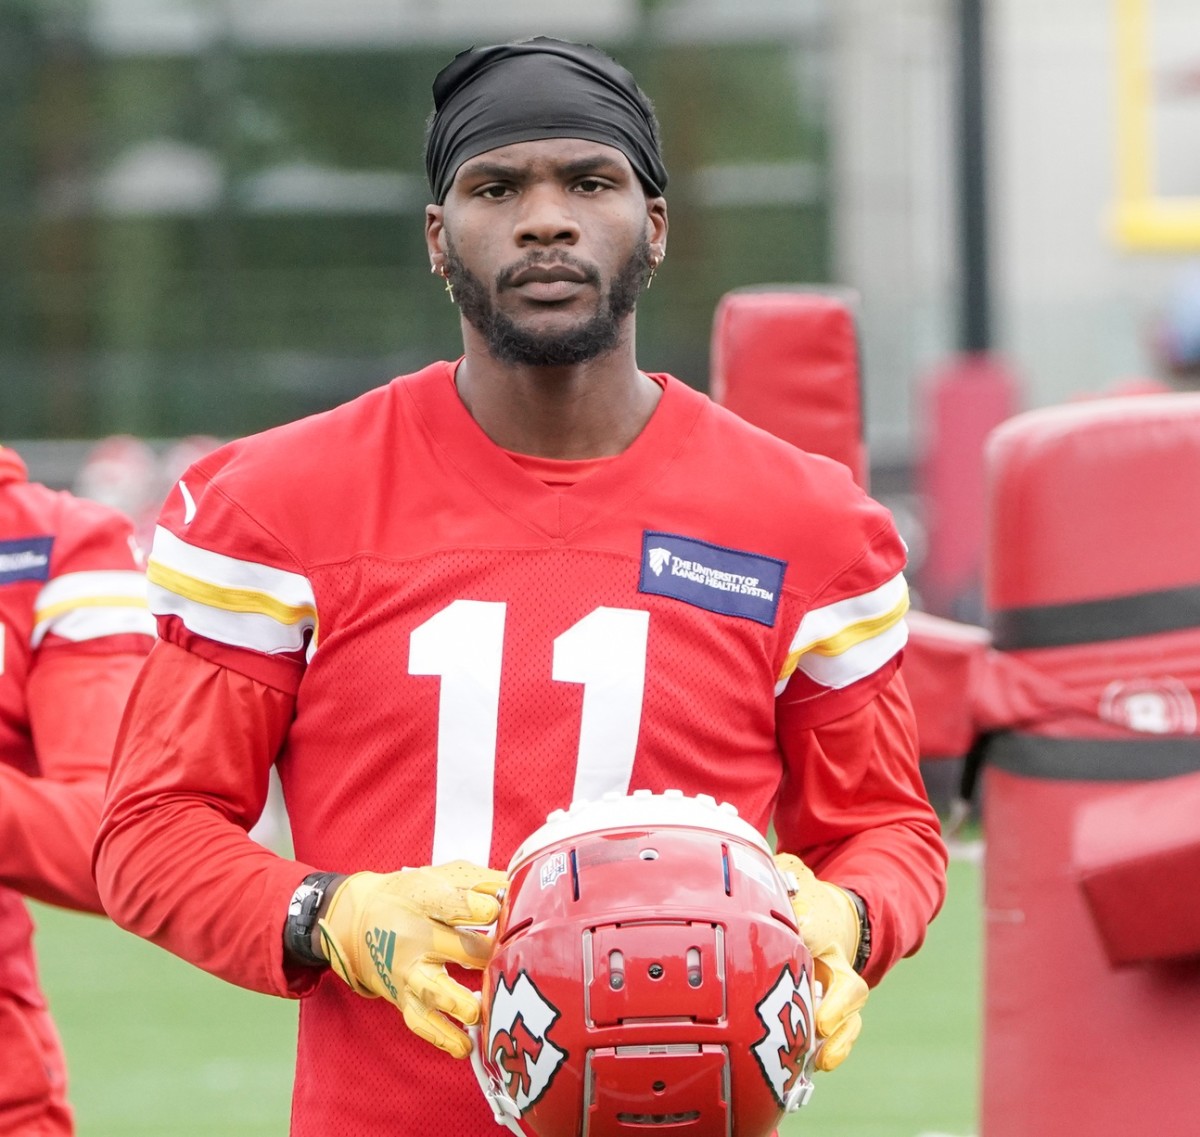 May 26, 2022; Kansas City, MO, USA; Kansas City Chiefs wide receiver Marquez Valdes-Scantling (11) takes a break during organized team activities at The University of Kansas Health System Training Complex. Mandatory Credit: Denny Medley-USA TODAY Sports